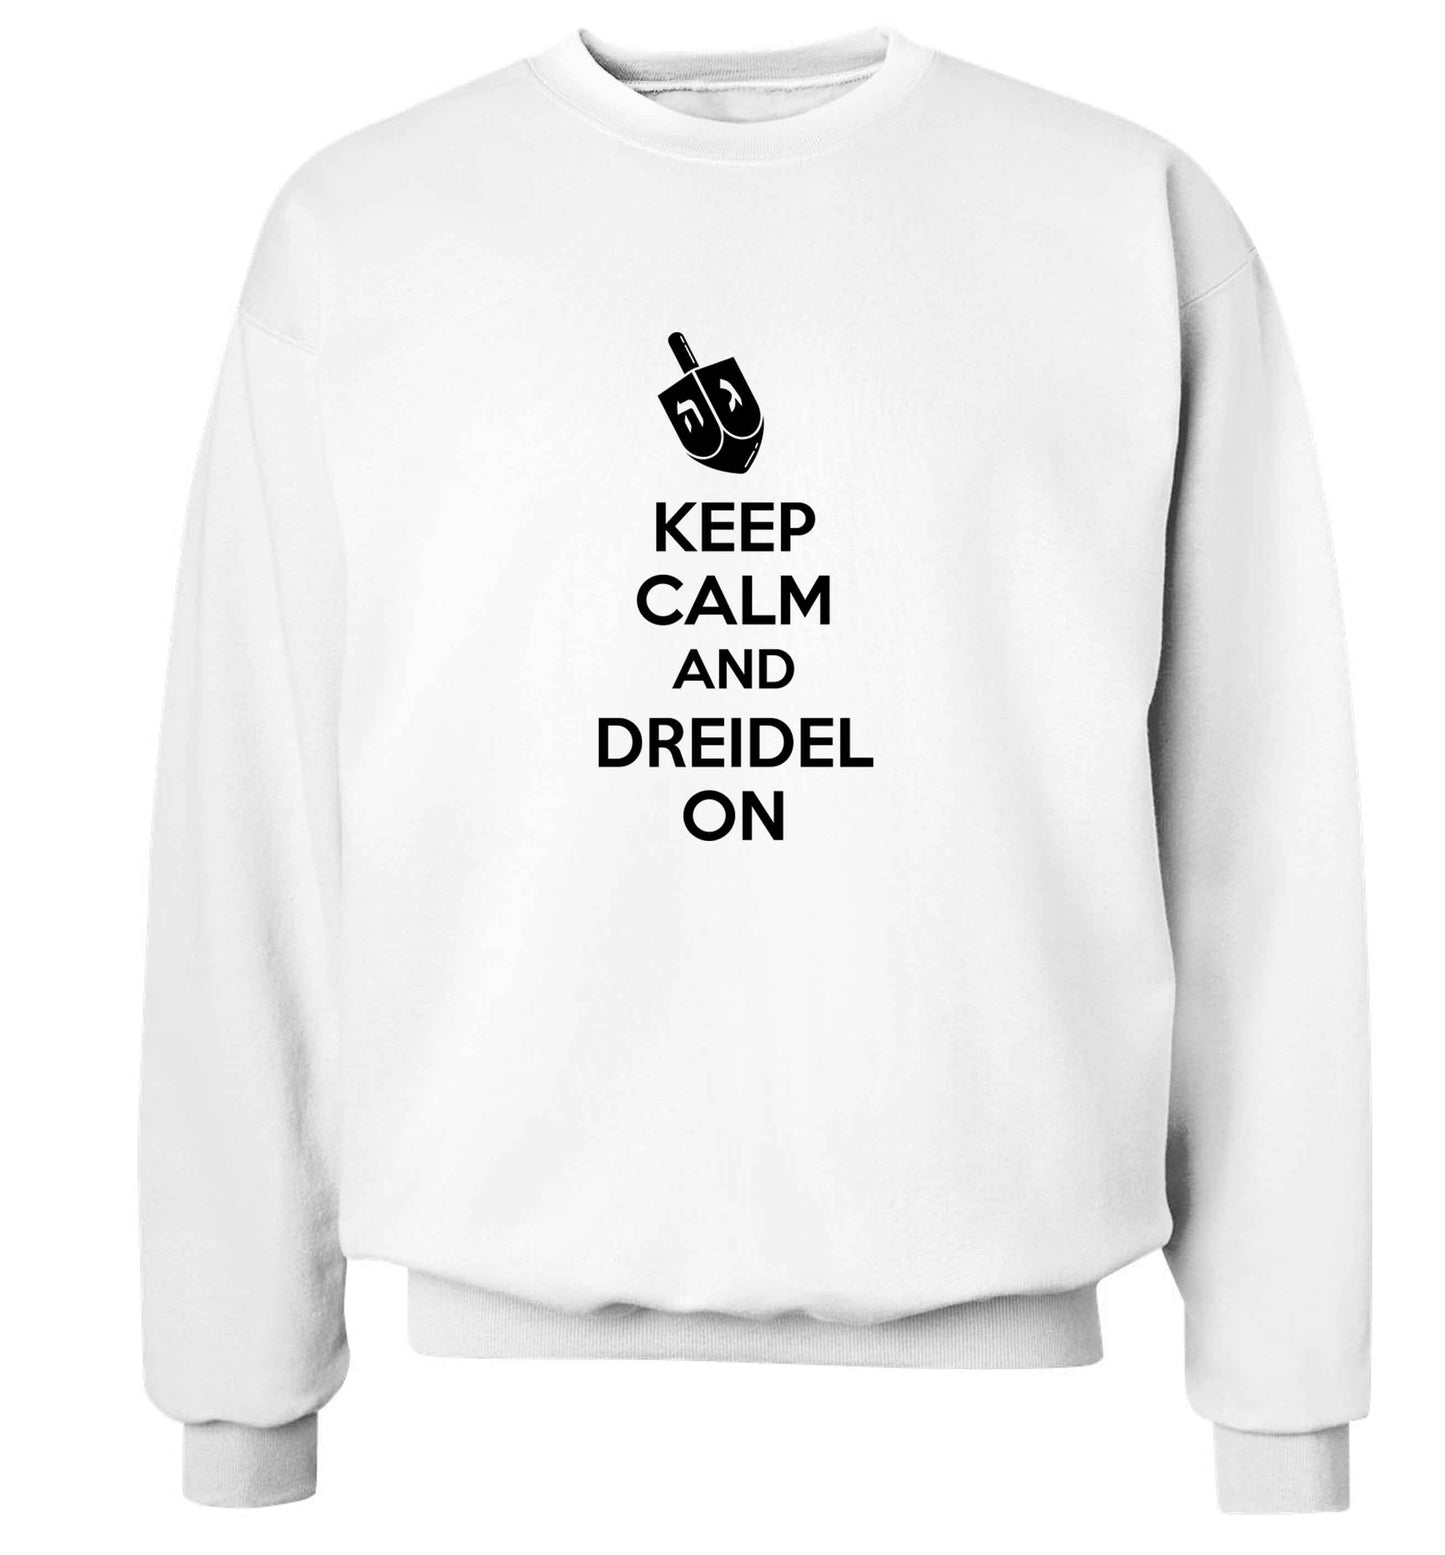 Keep calm and dreidel on adult's unisex white sweater 2XL